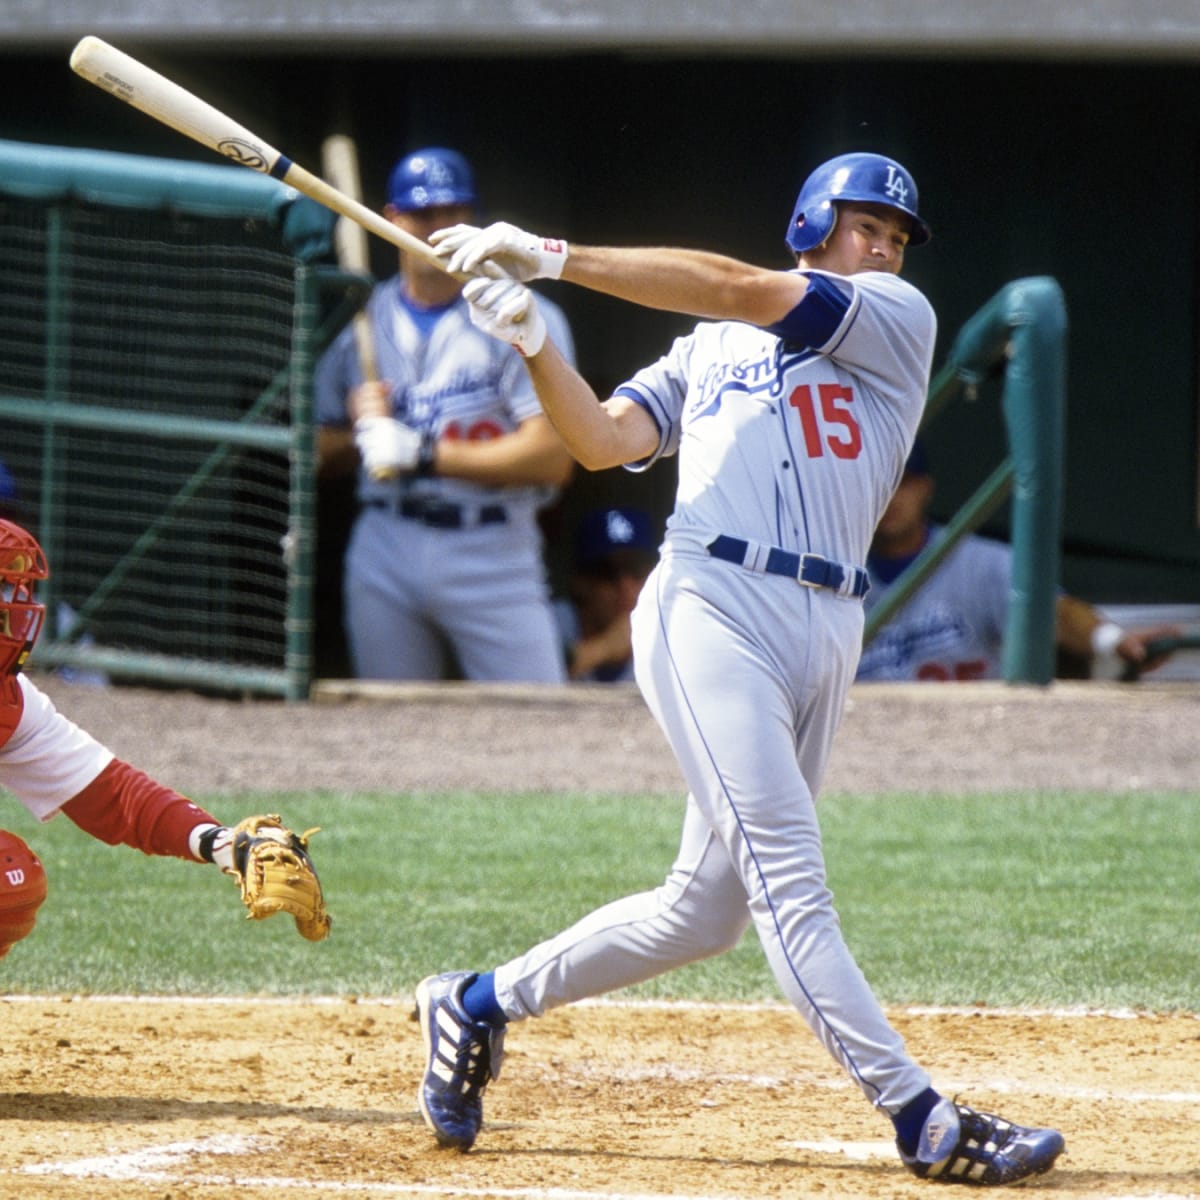 Dodgers: Today is the 20th Anniversary of Shawn Green's Legendary